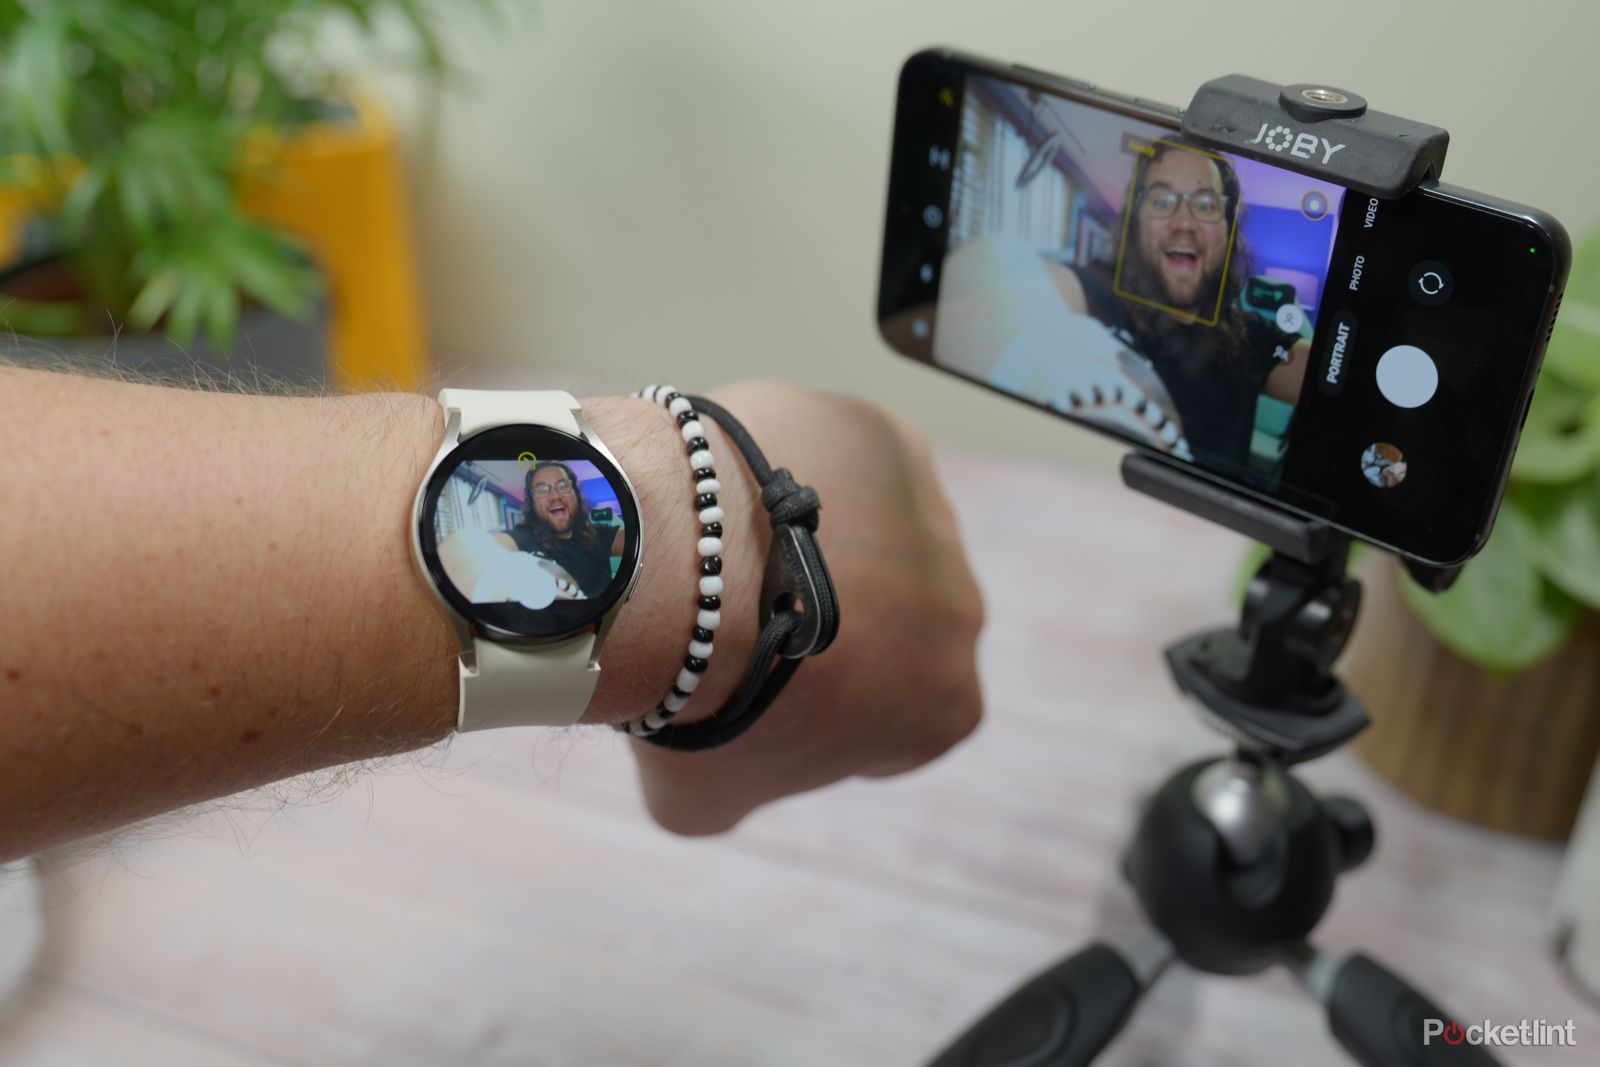 You can control your Samsung phone camera with a Galaxy Watch: Here's how!